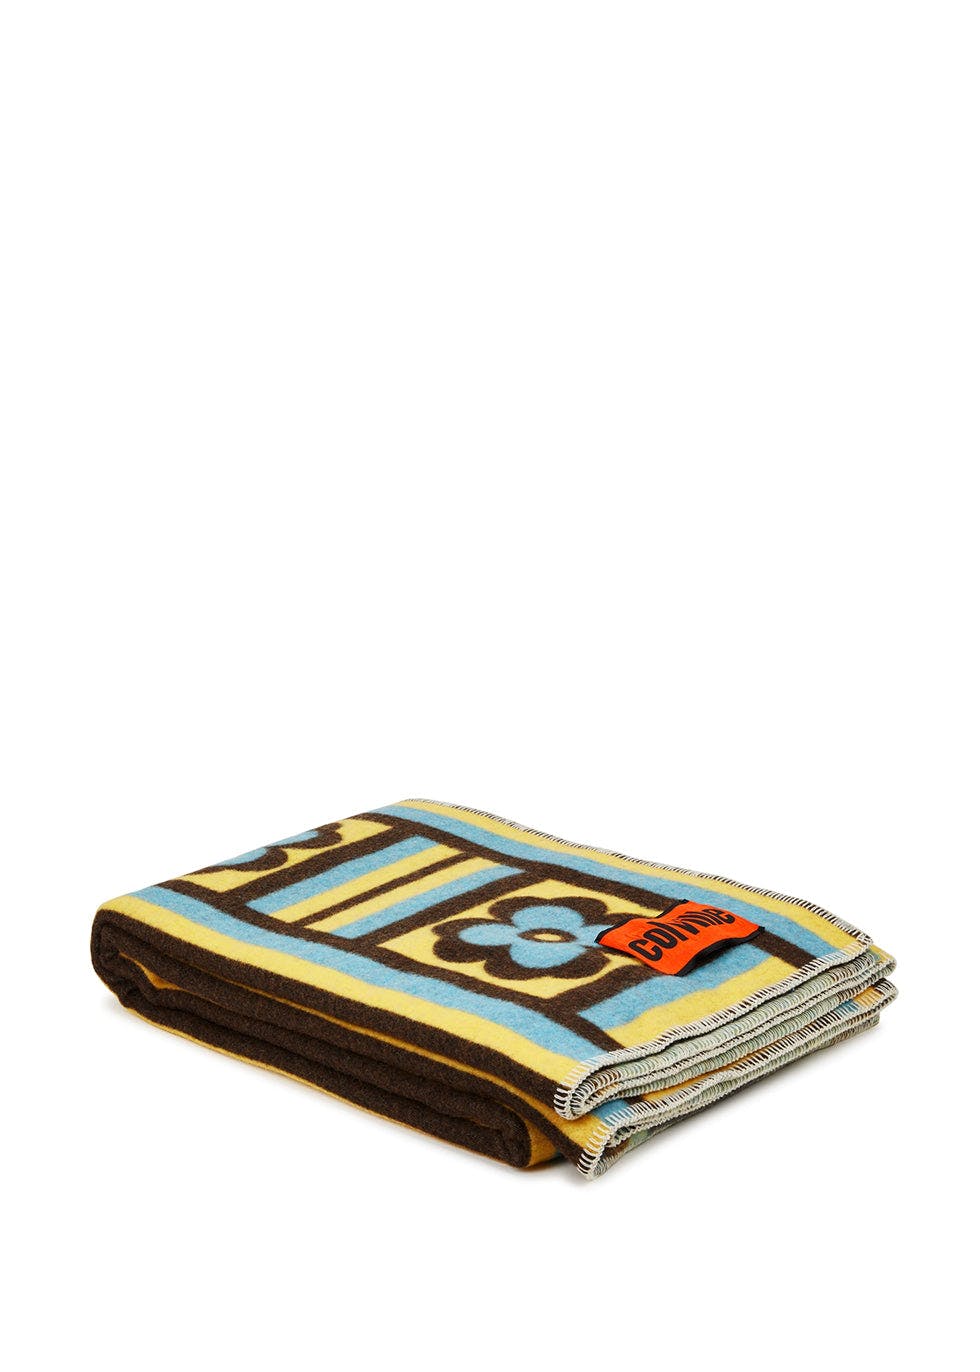 Blue and yellow flower print wool blanket